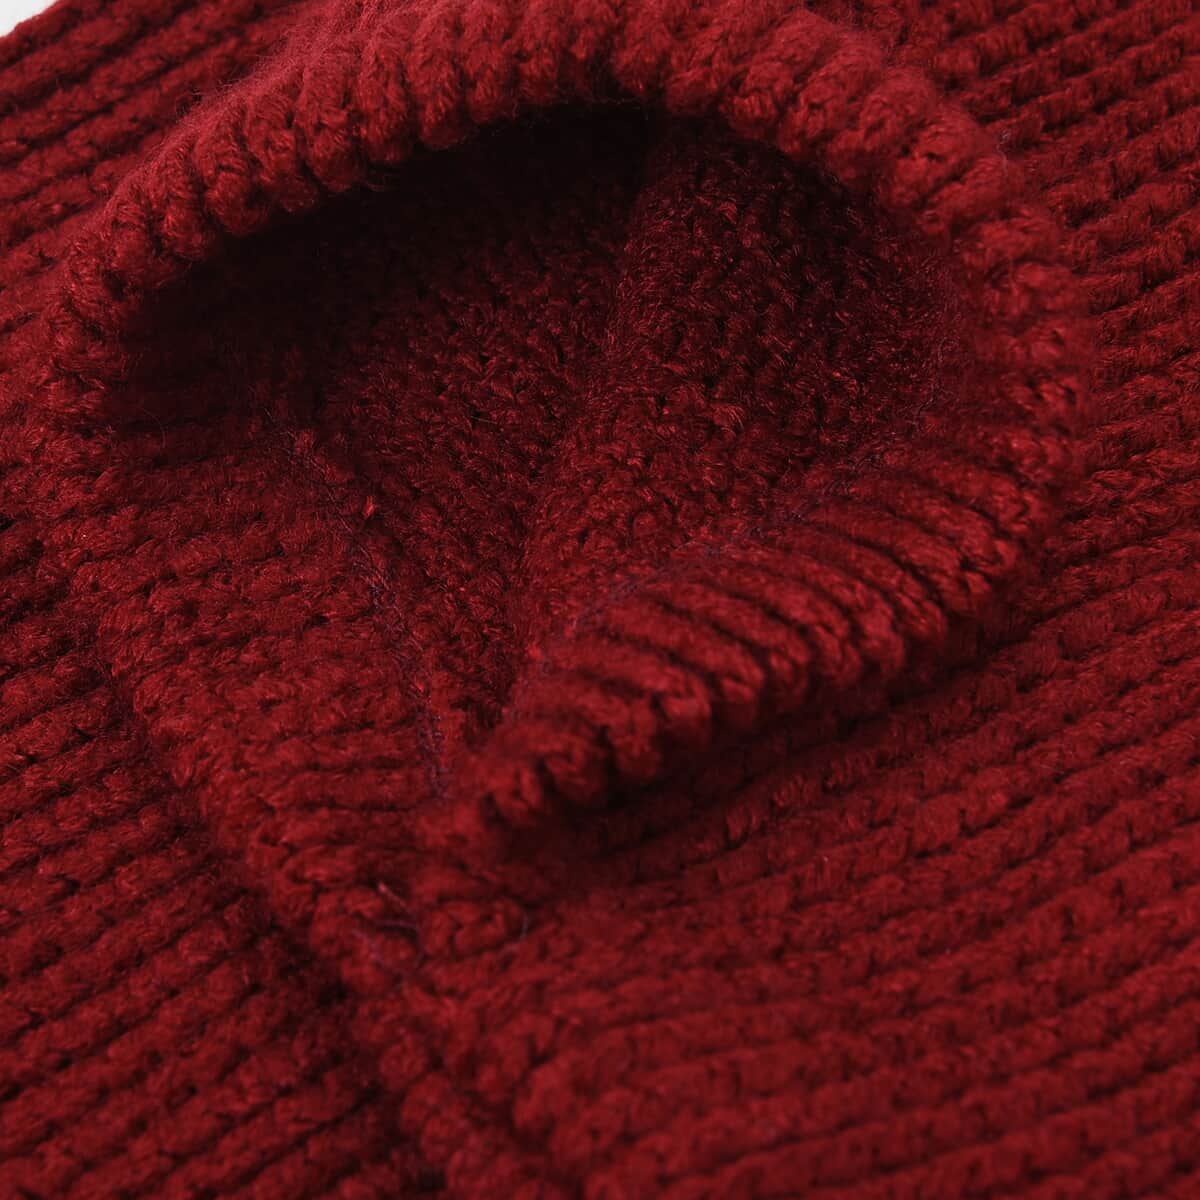 Maroon Solid Knitted Shrug image number 3